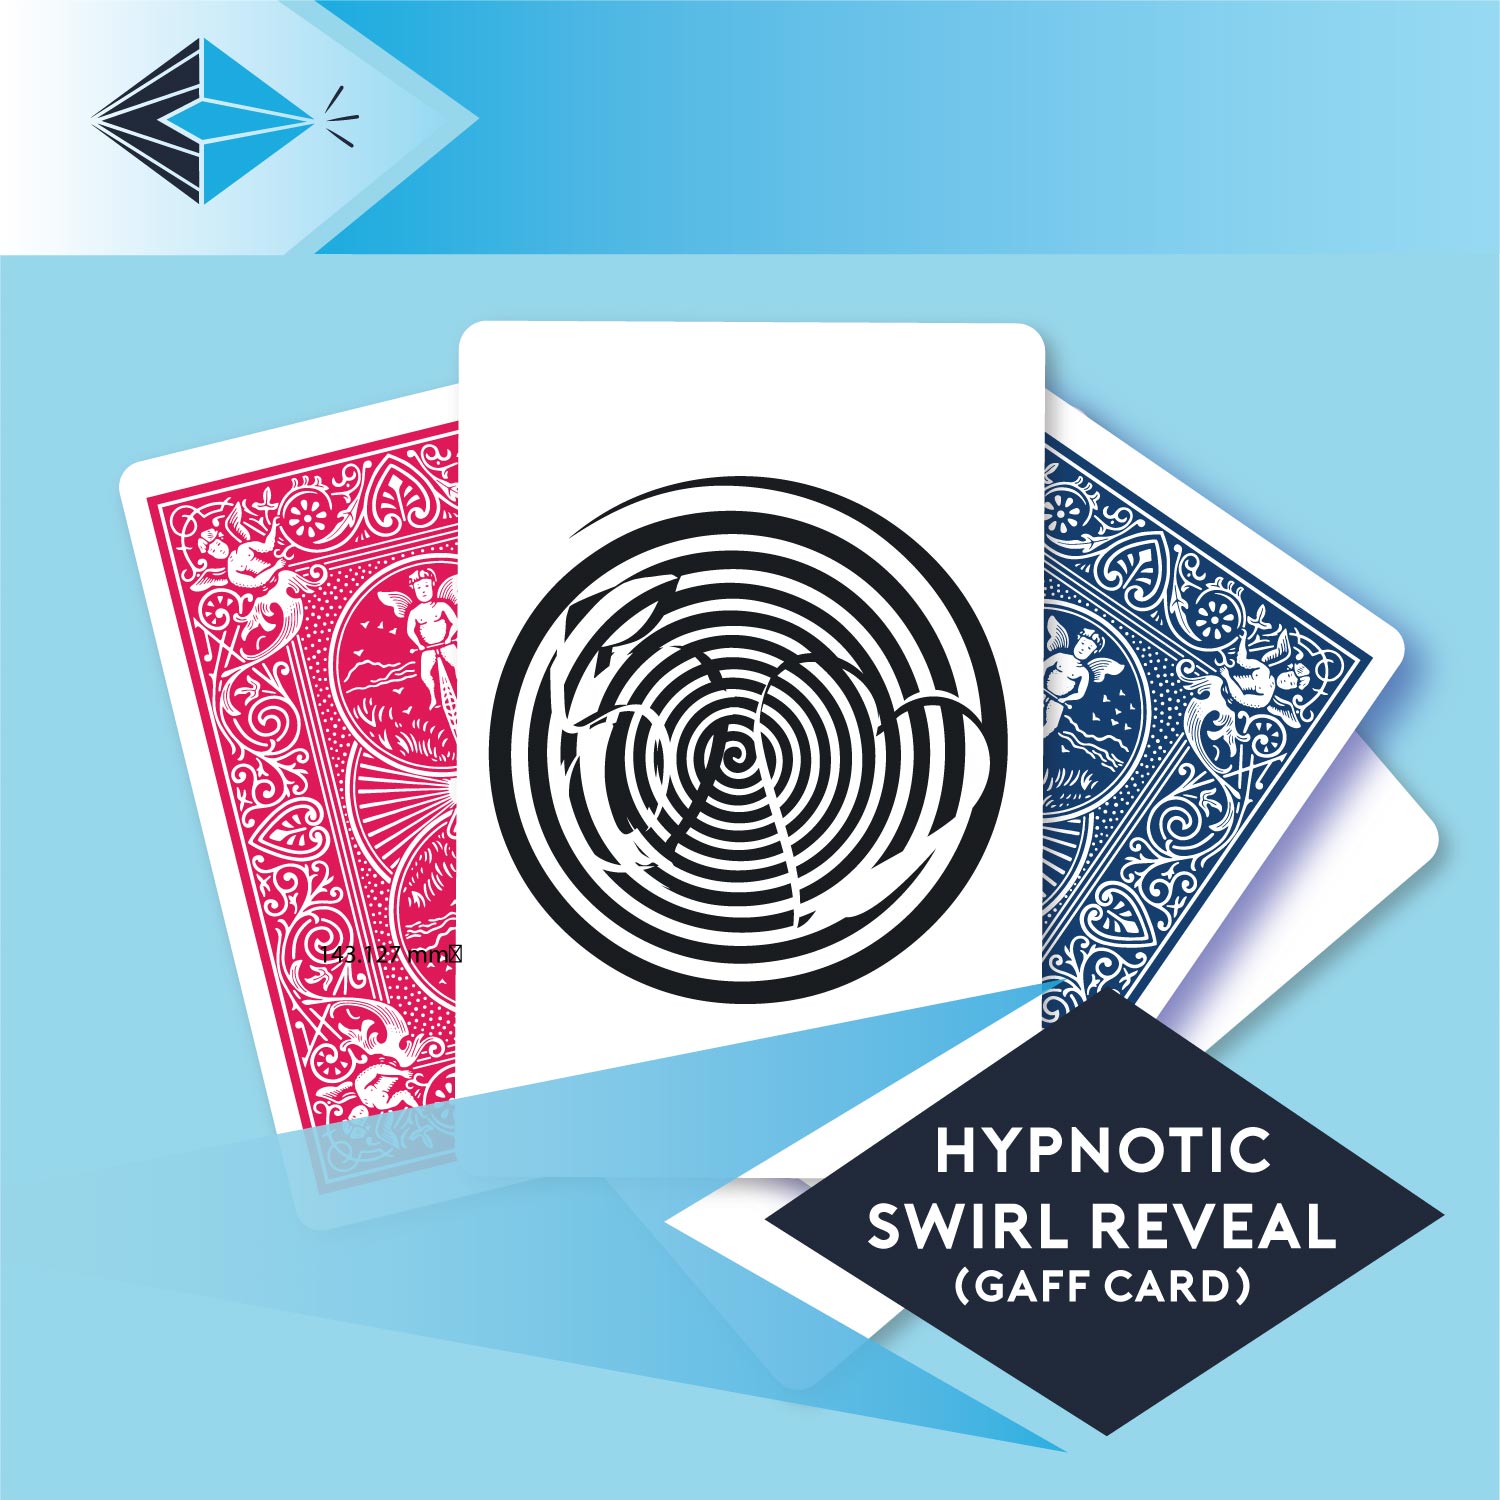 hypnotic swirl reveal gaff card 5 printbymagic magicians gaff cards printers Stockport Manchester UK